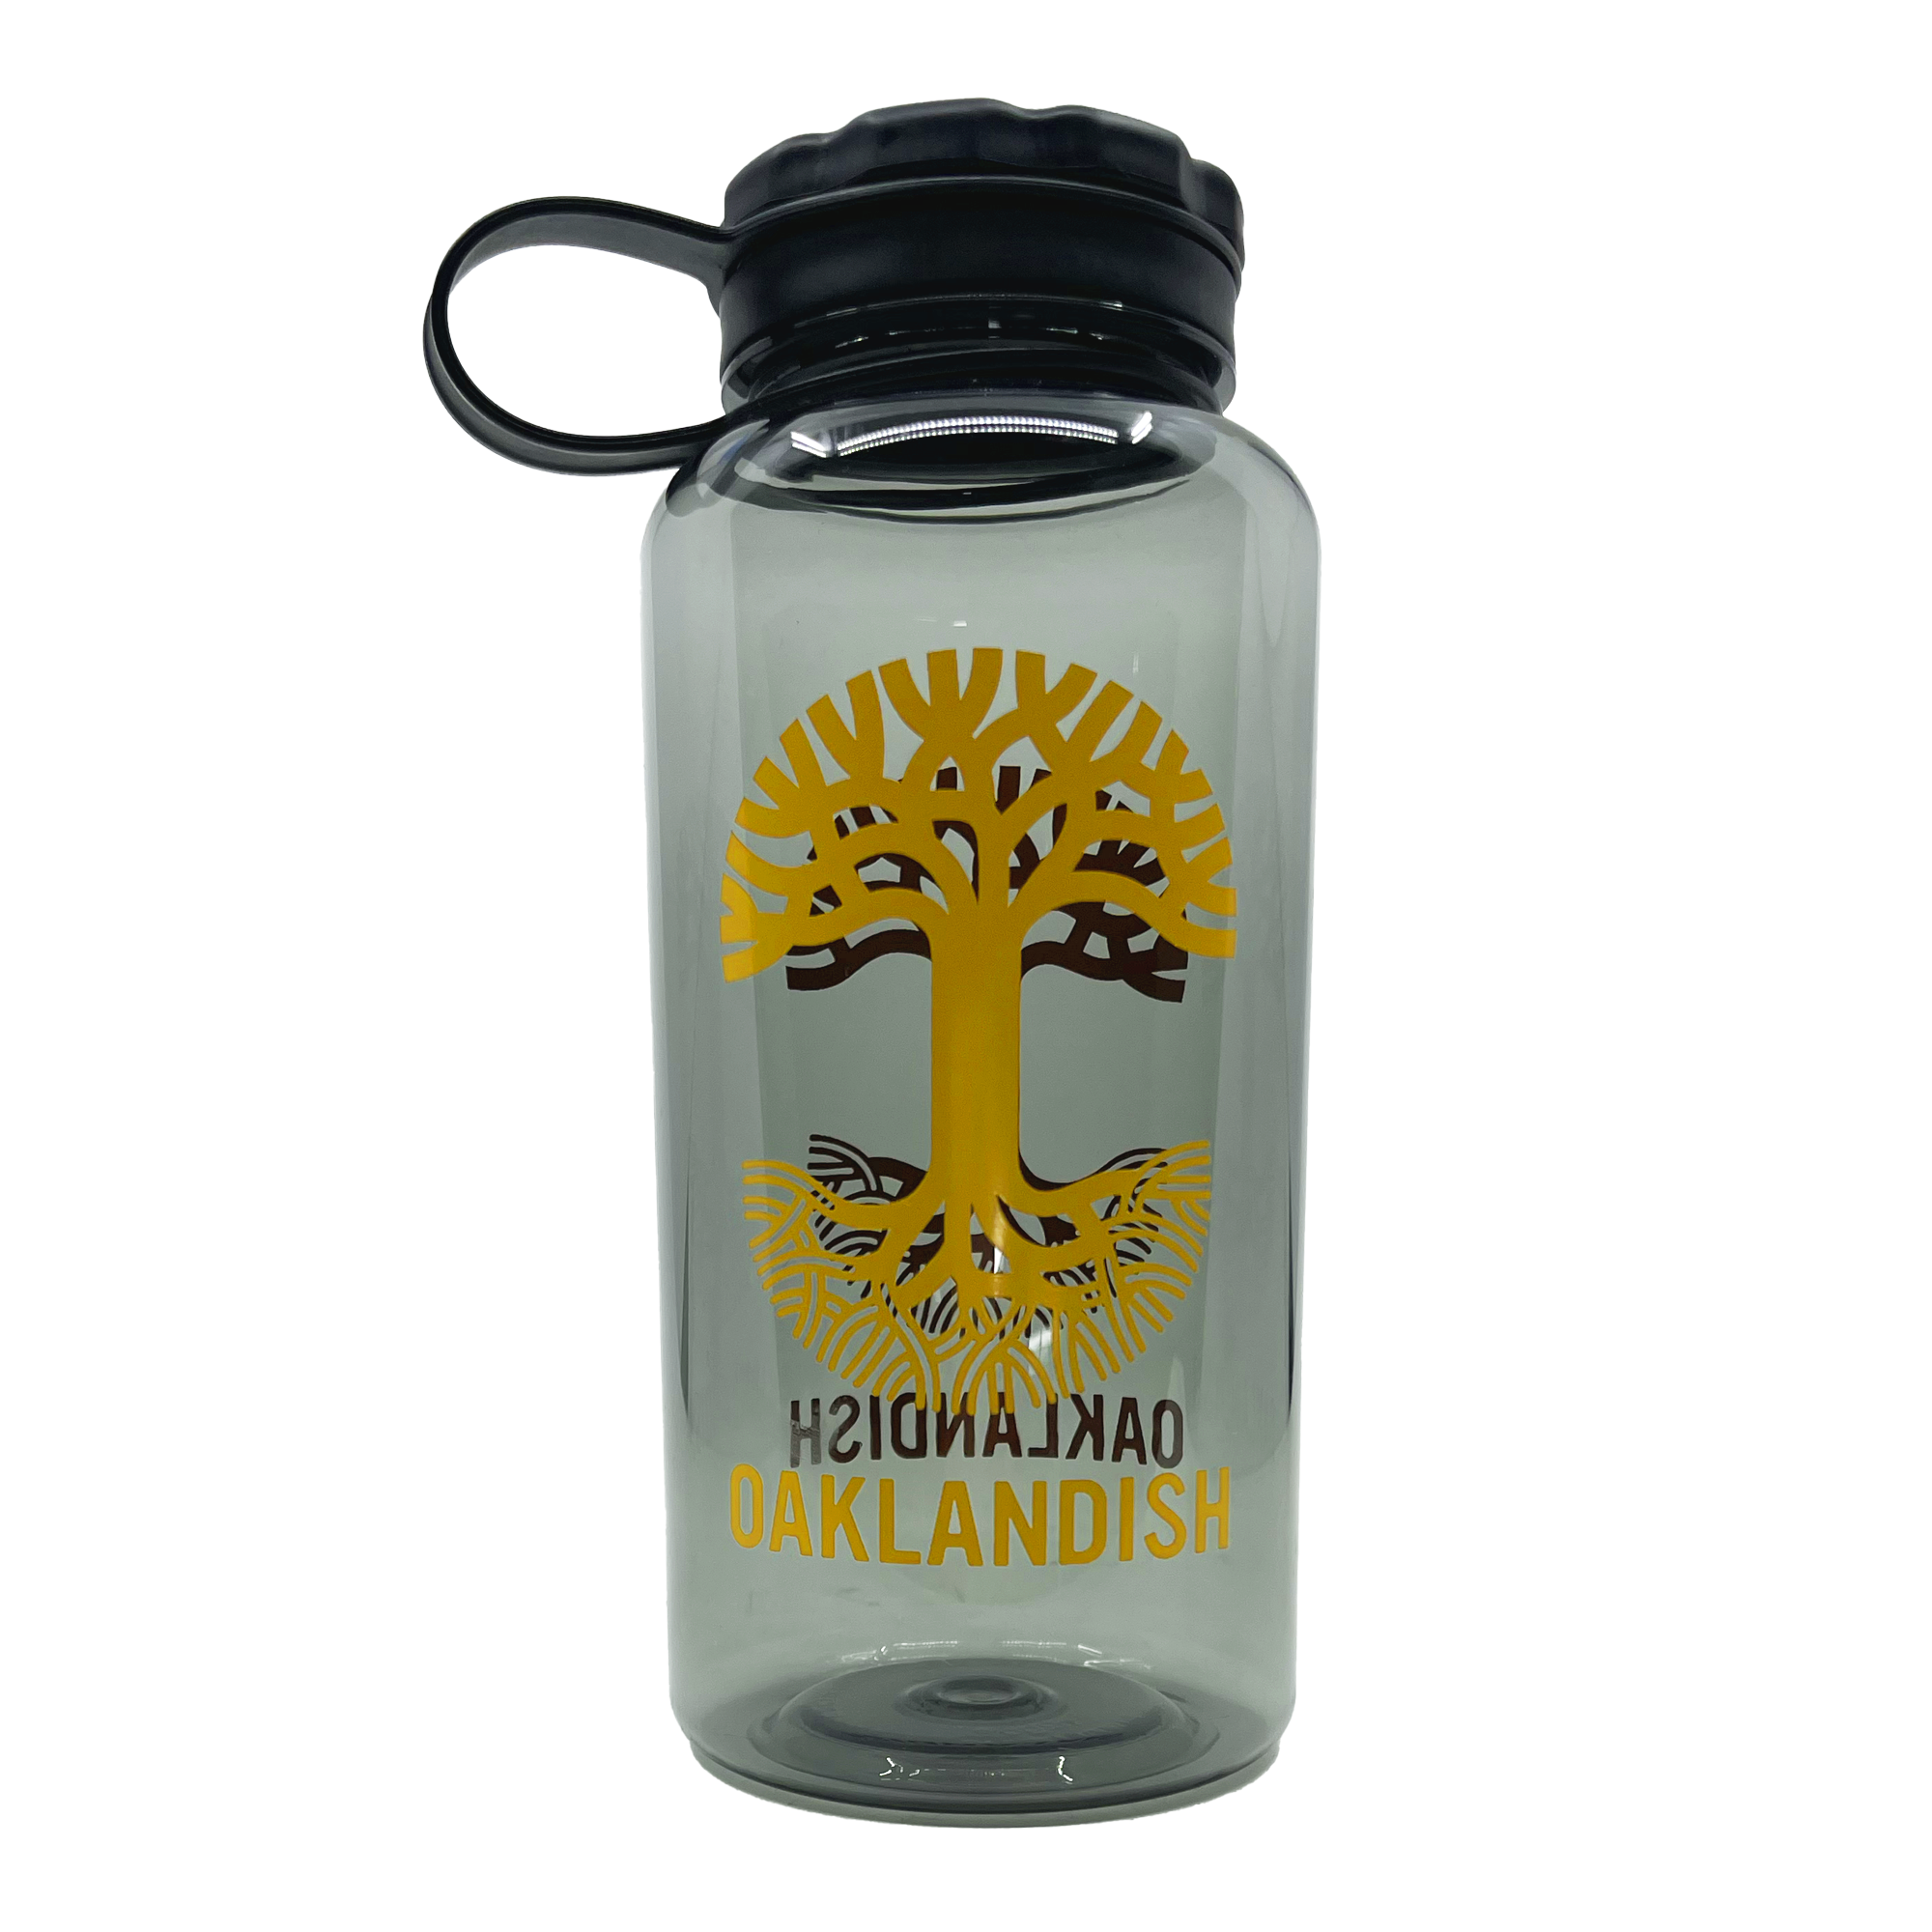 Translucent grey water bottle with scre-on black lid with yello Oaklandish tree logo and text, head on.